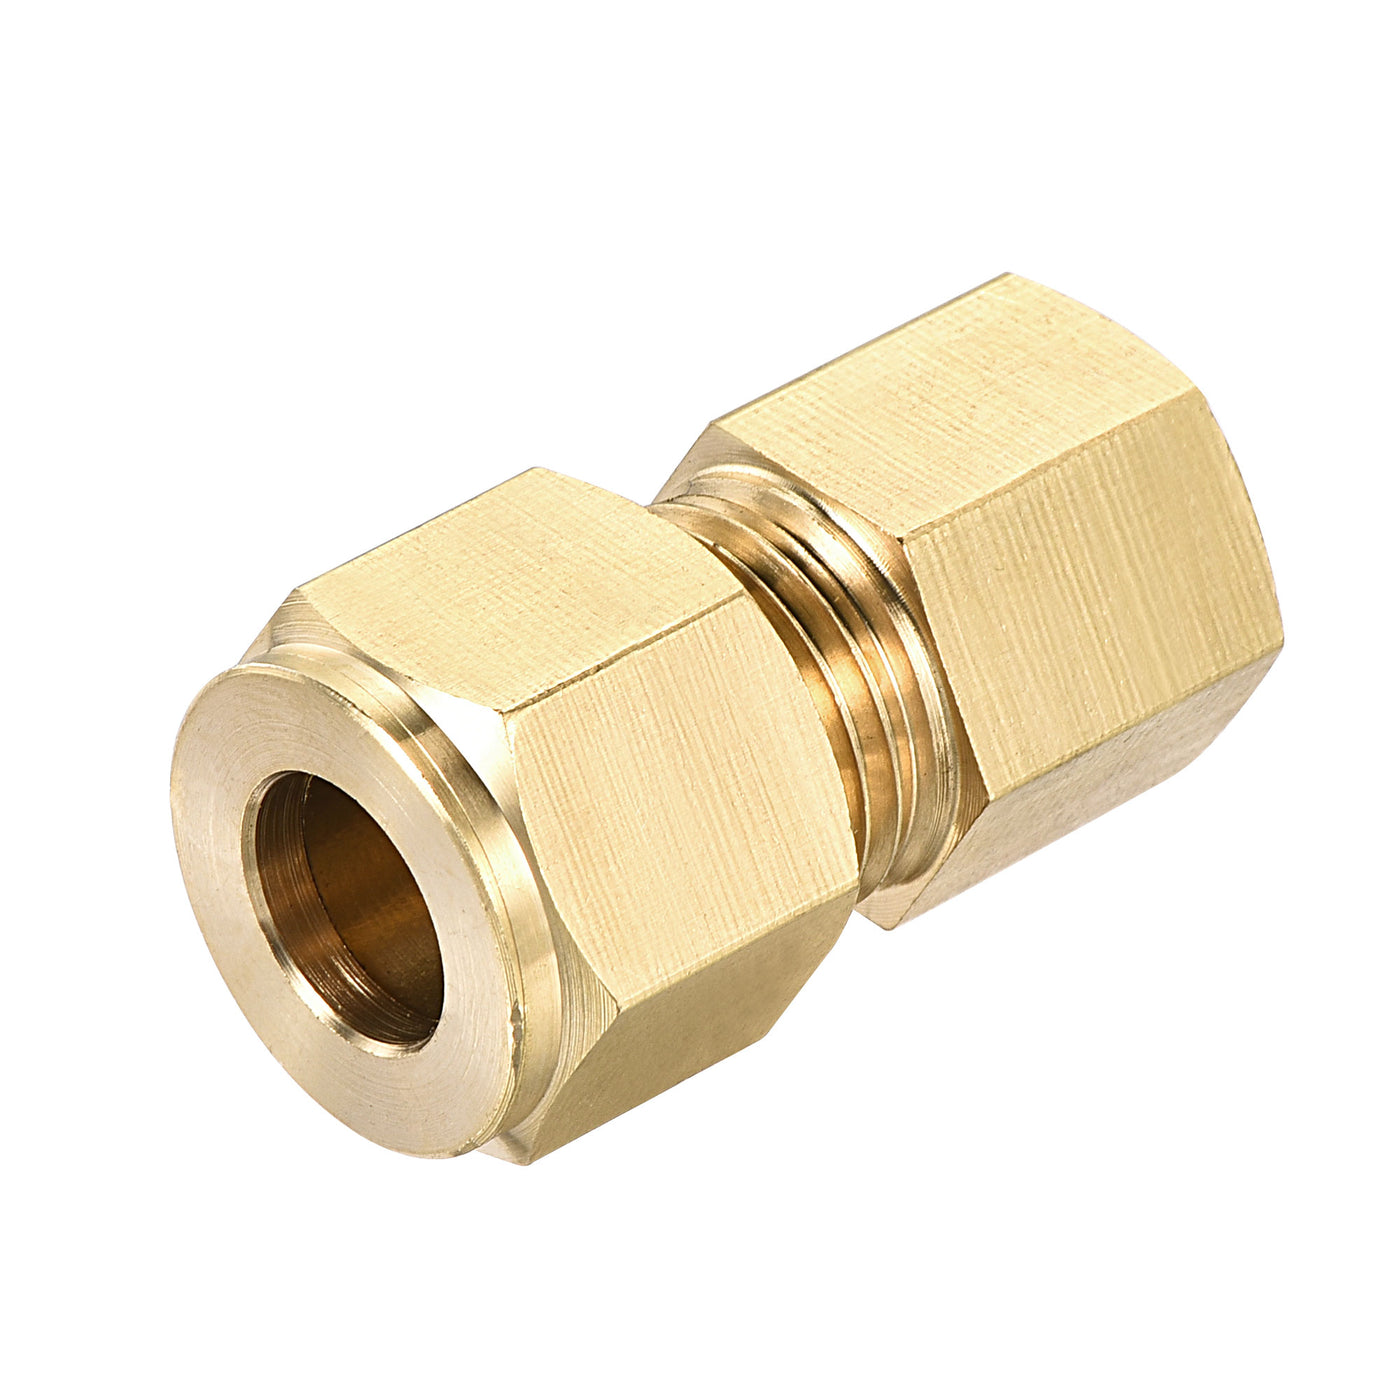 Uxcell Uxcell Compression Tube Fitting G1/4 Female Thread x 10mm Tube OD Straight Coupling Adapter Brass, 2pcs